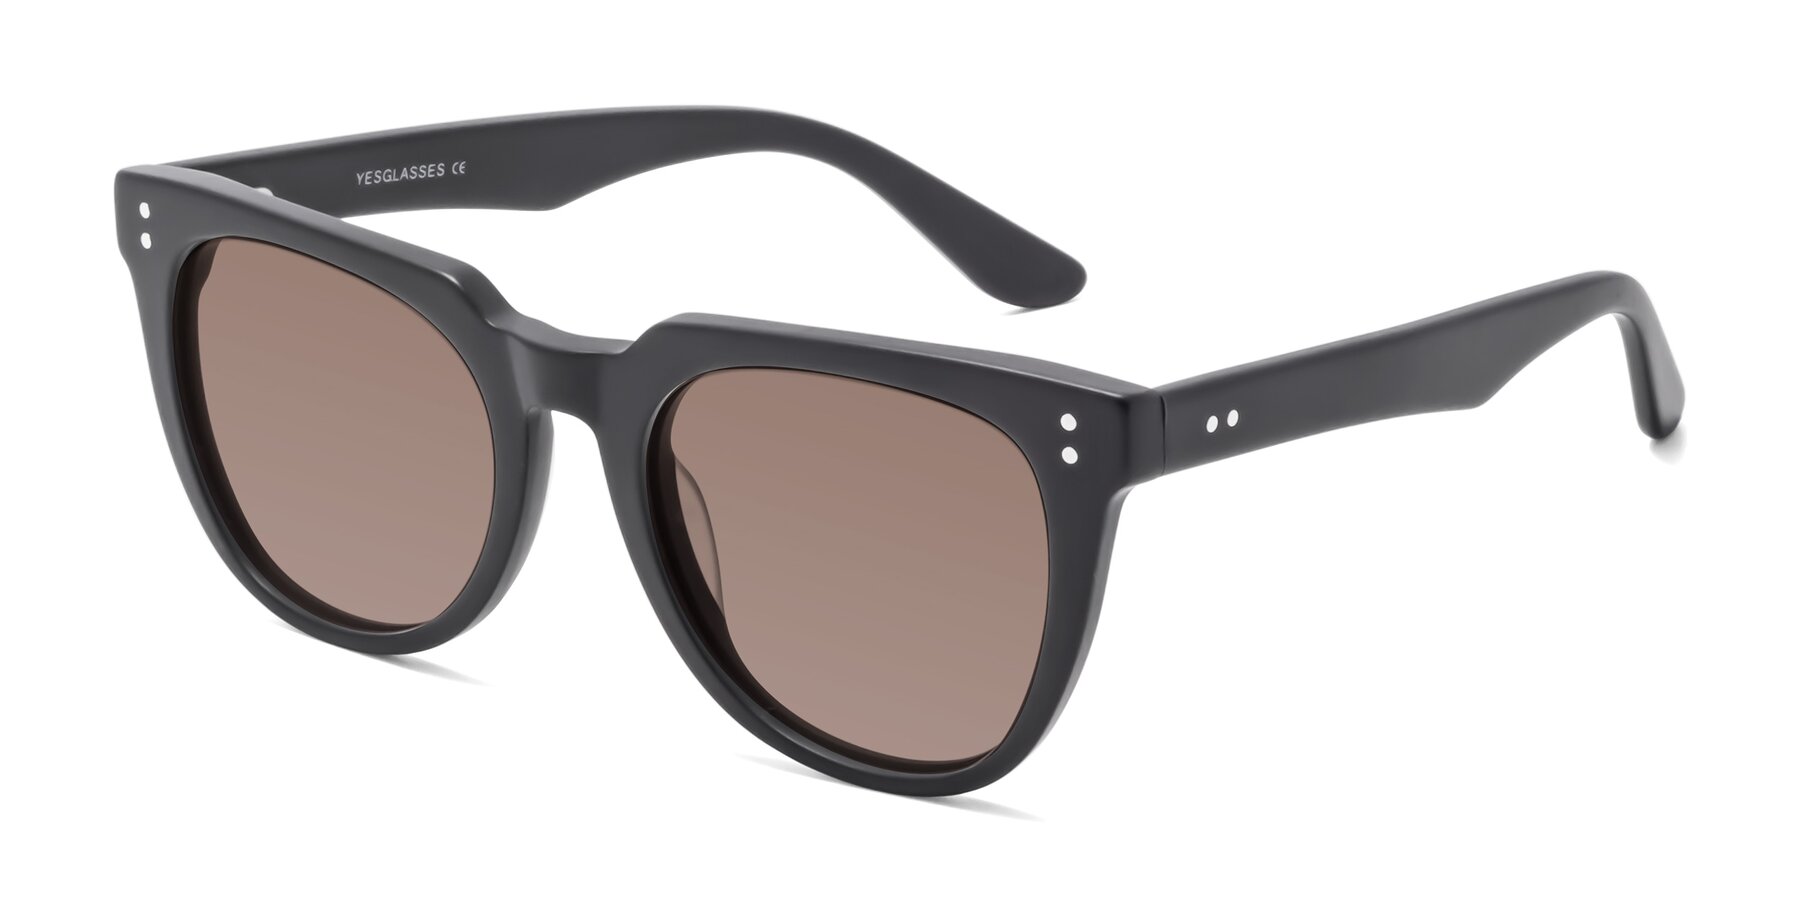 Angle of Graceful in Matte Black with Medium Brown Tinted Lenses